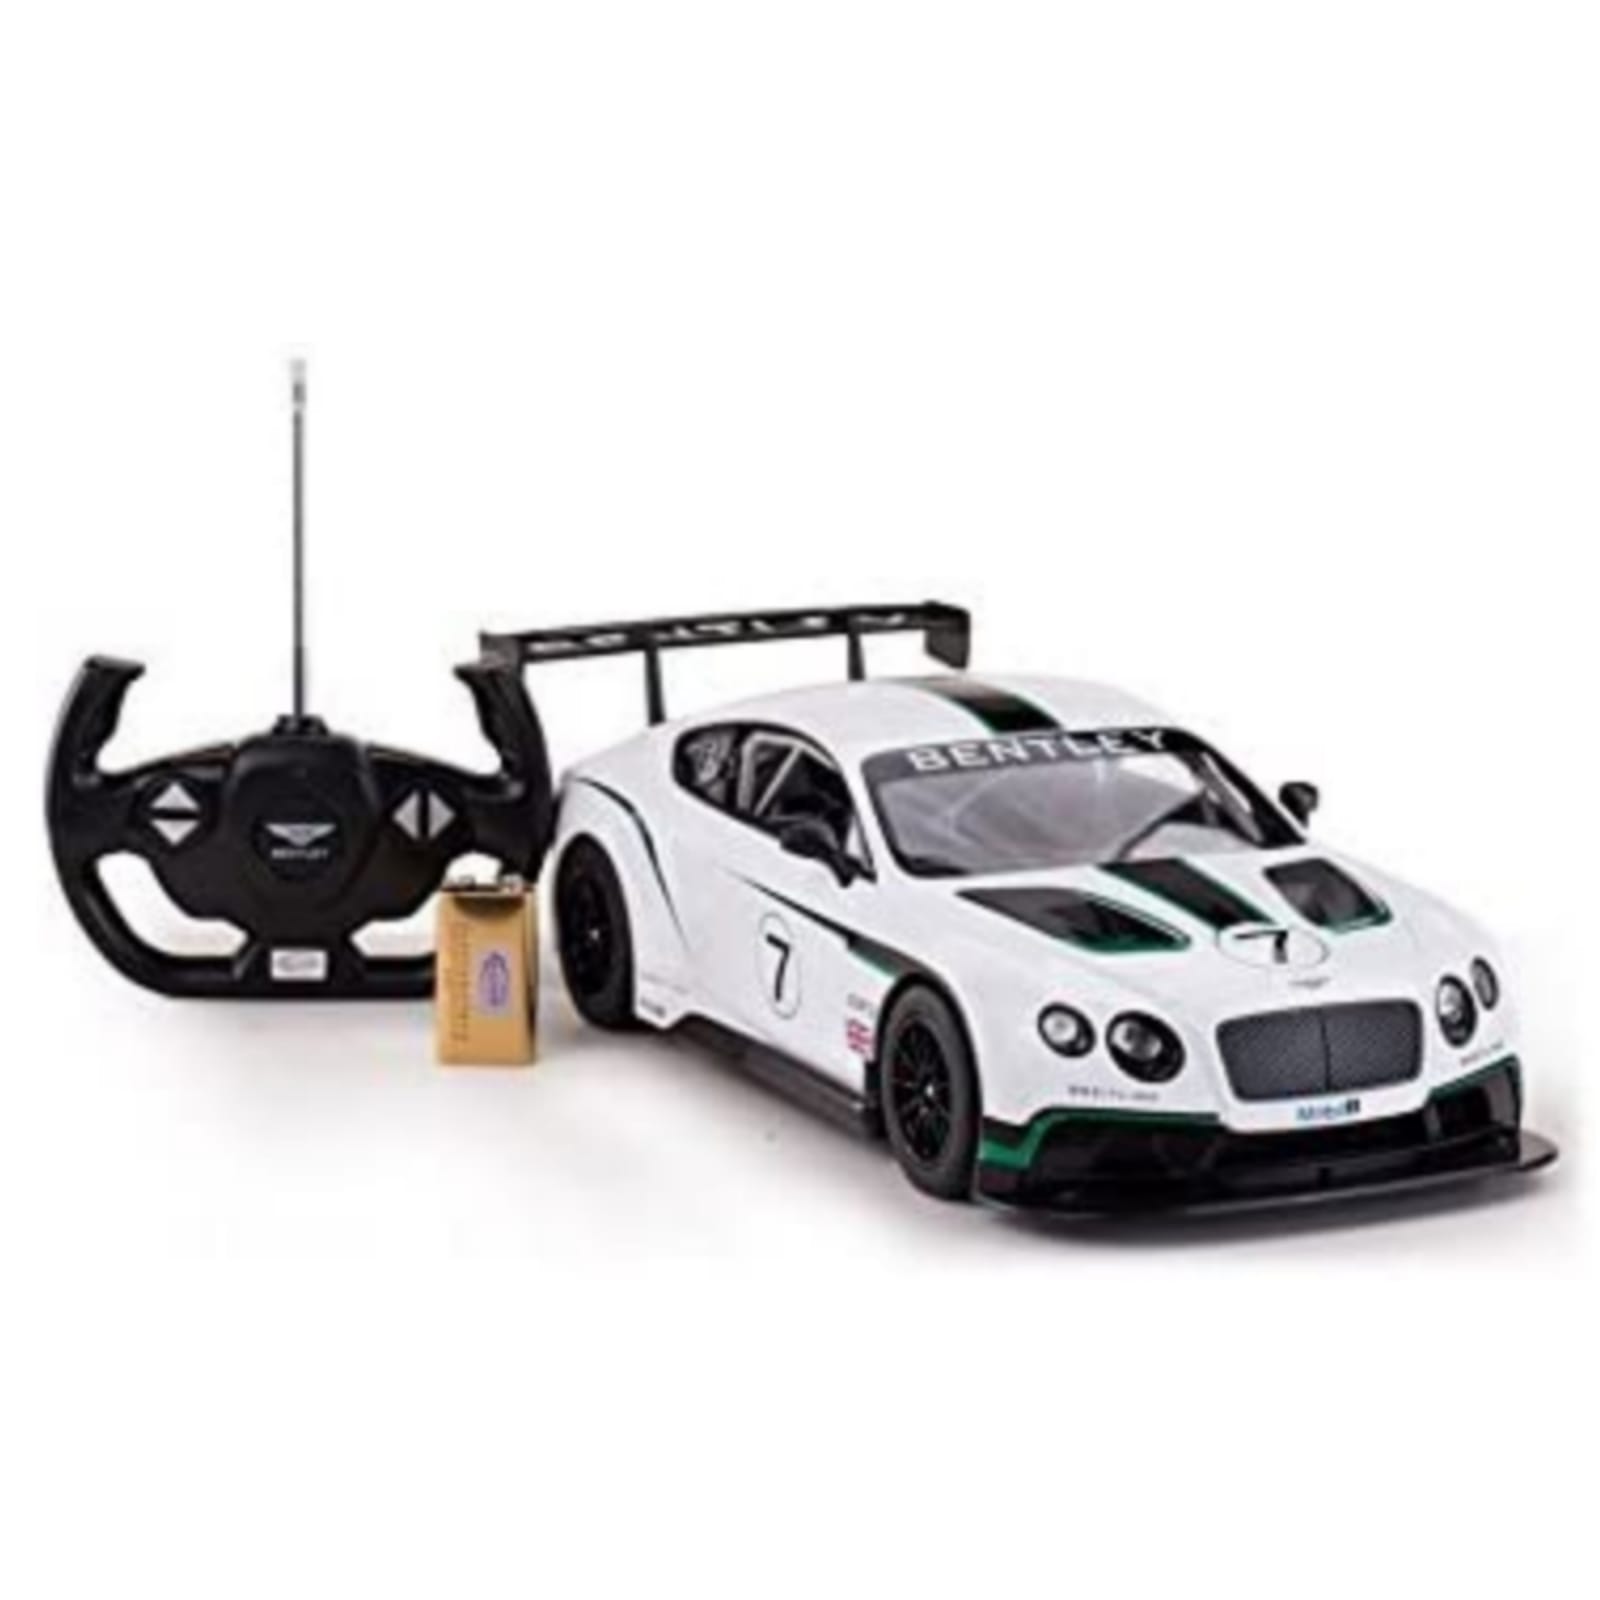 1:14 Official Licensed Bentley Continental GT3 Radio Remote Control Car Toy Red 